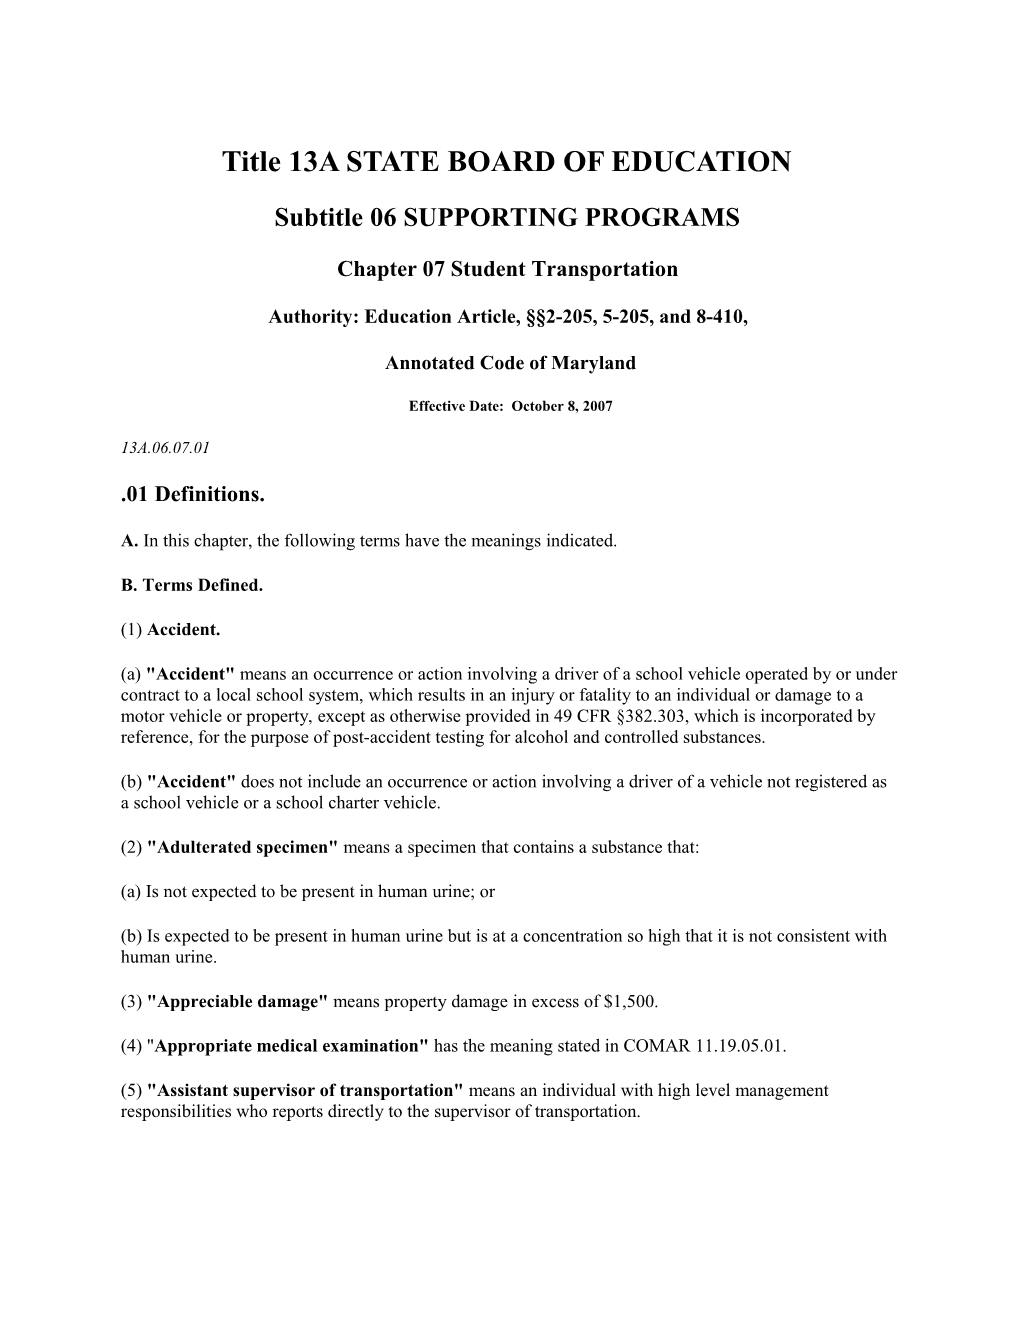 Title 13A STATE BOARD of EDUCATION